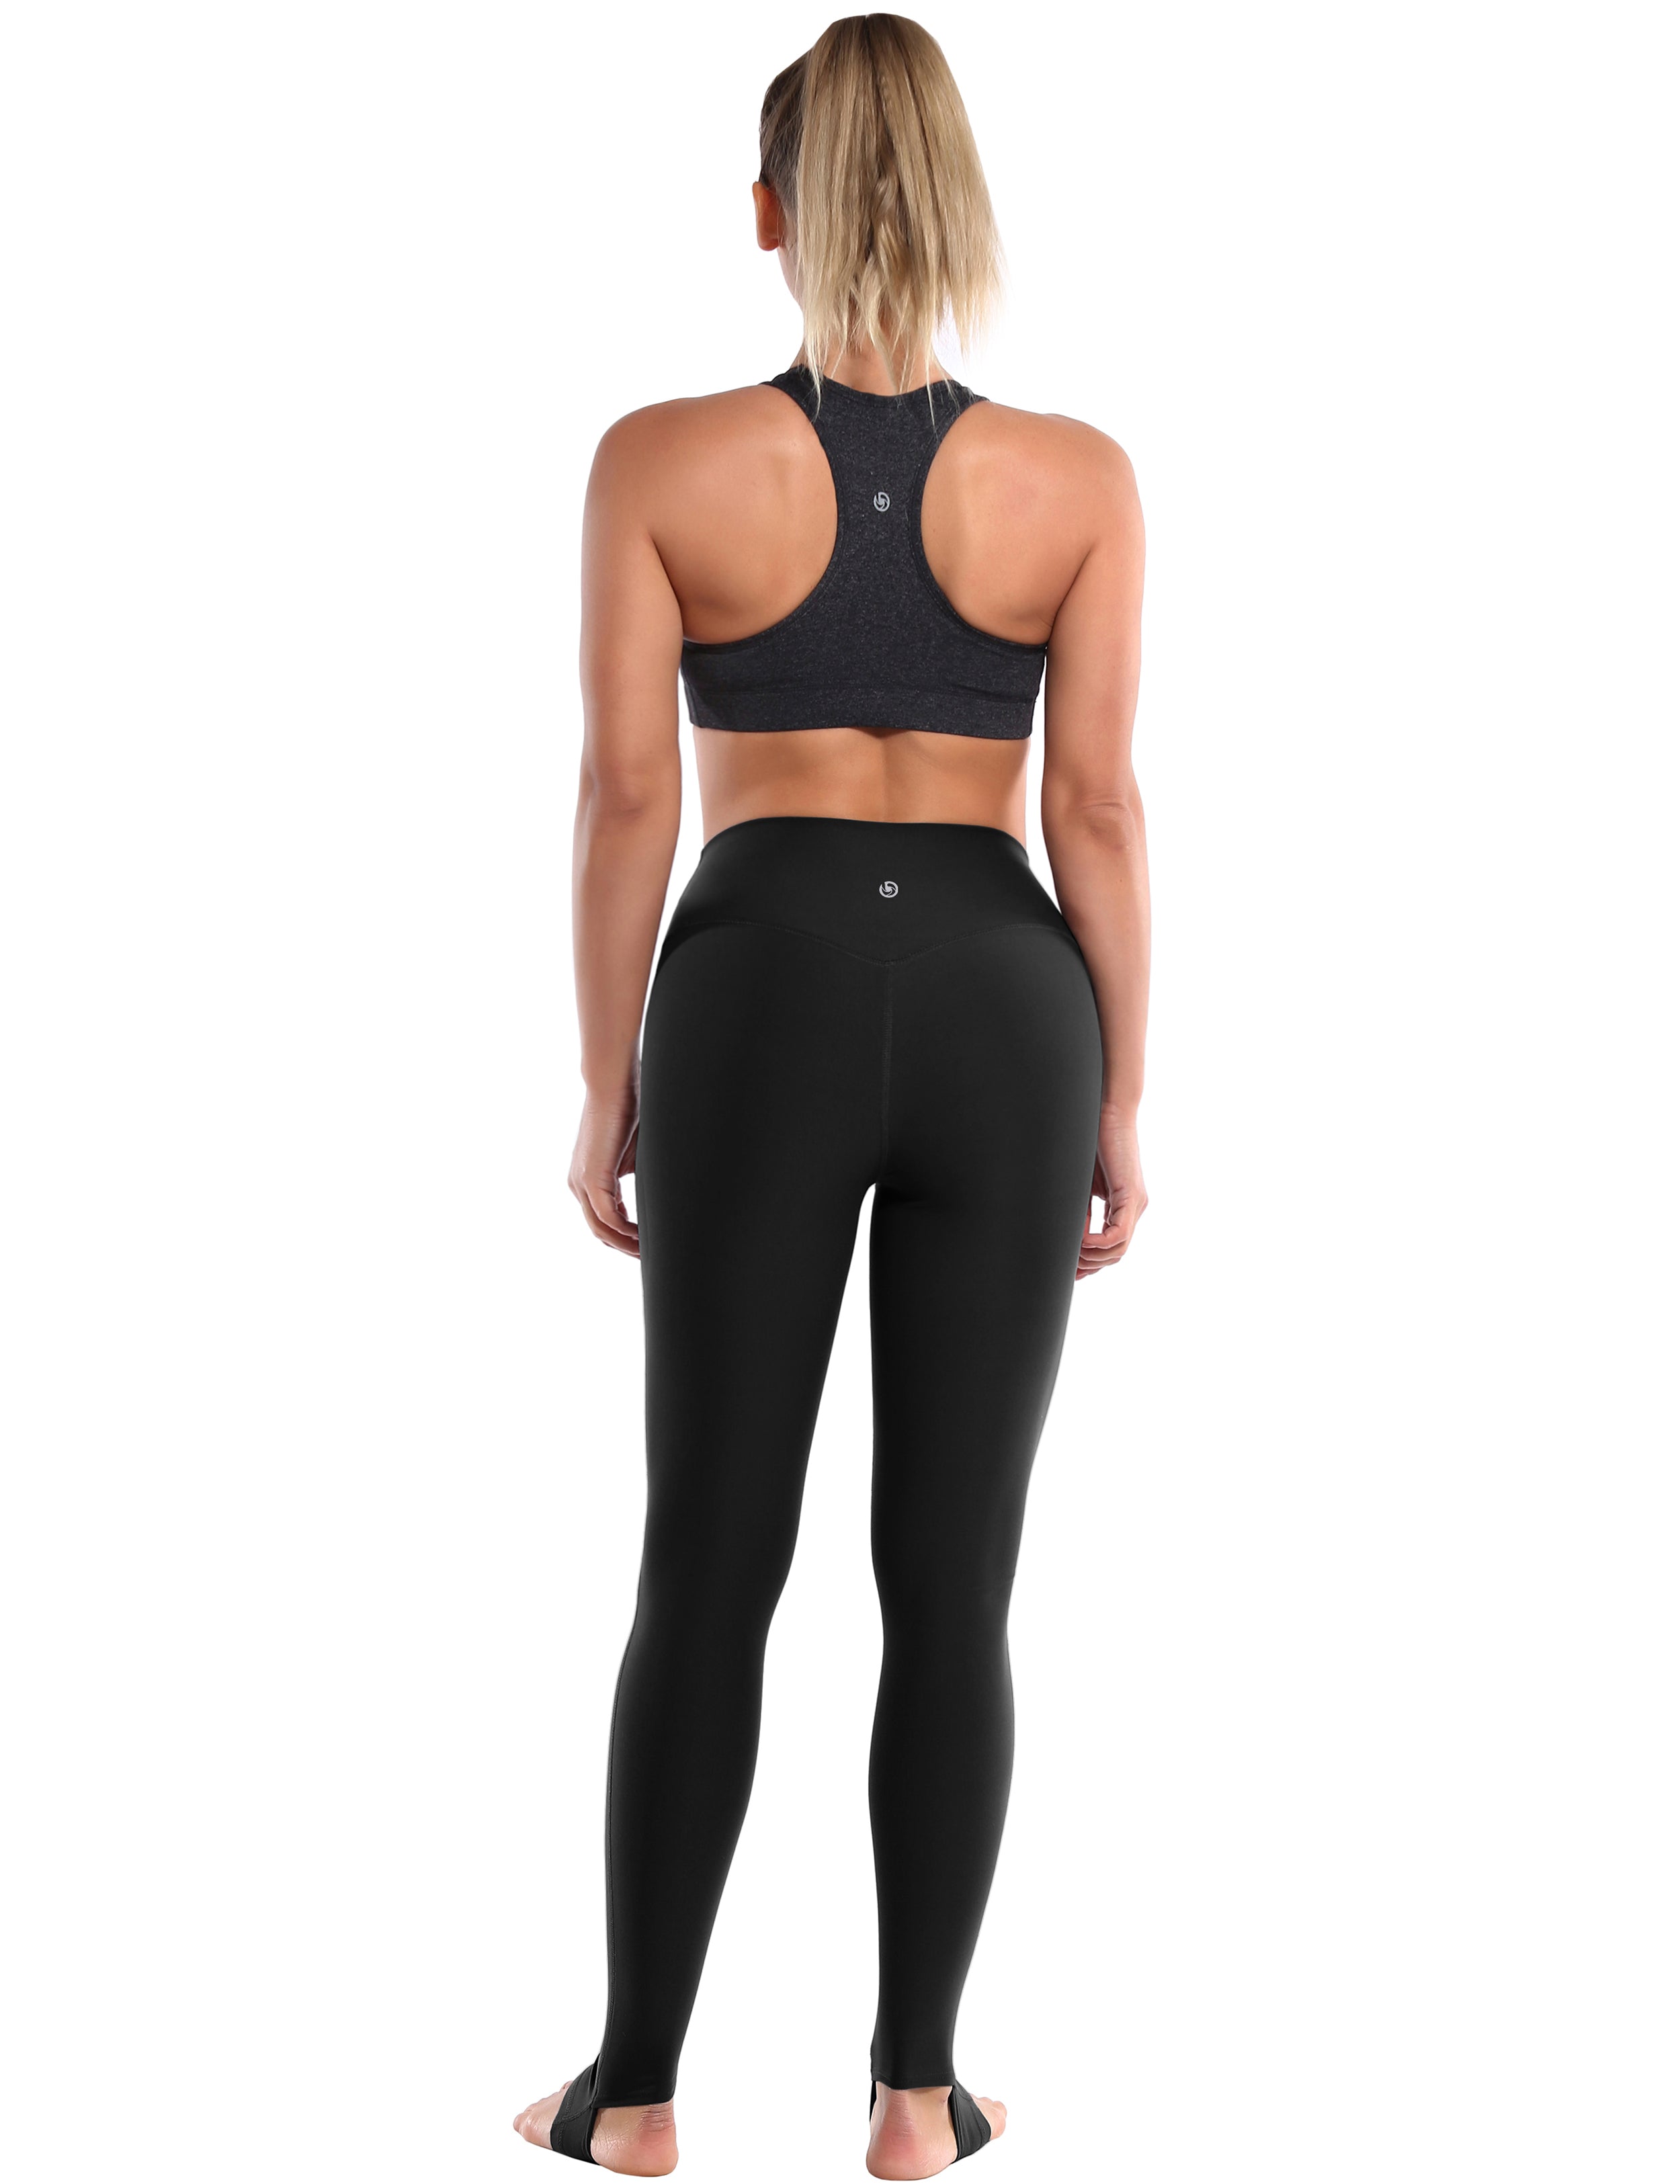 Over the Heel Jogging Pants black Over the Heel Design 87%Nylon/13%Spandex Fabric doesn't attract lint easily 4-way stretch No see-through Moisture-wicking Tummy control